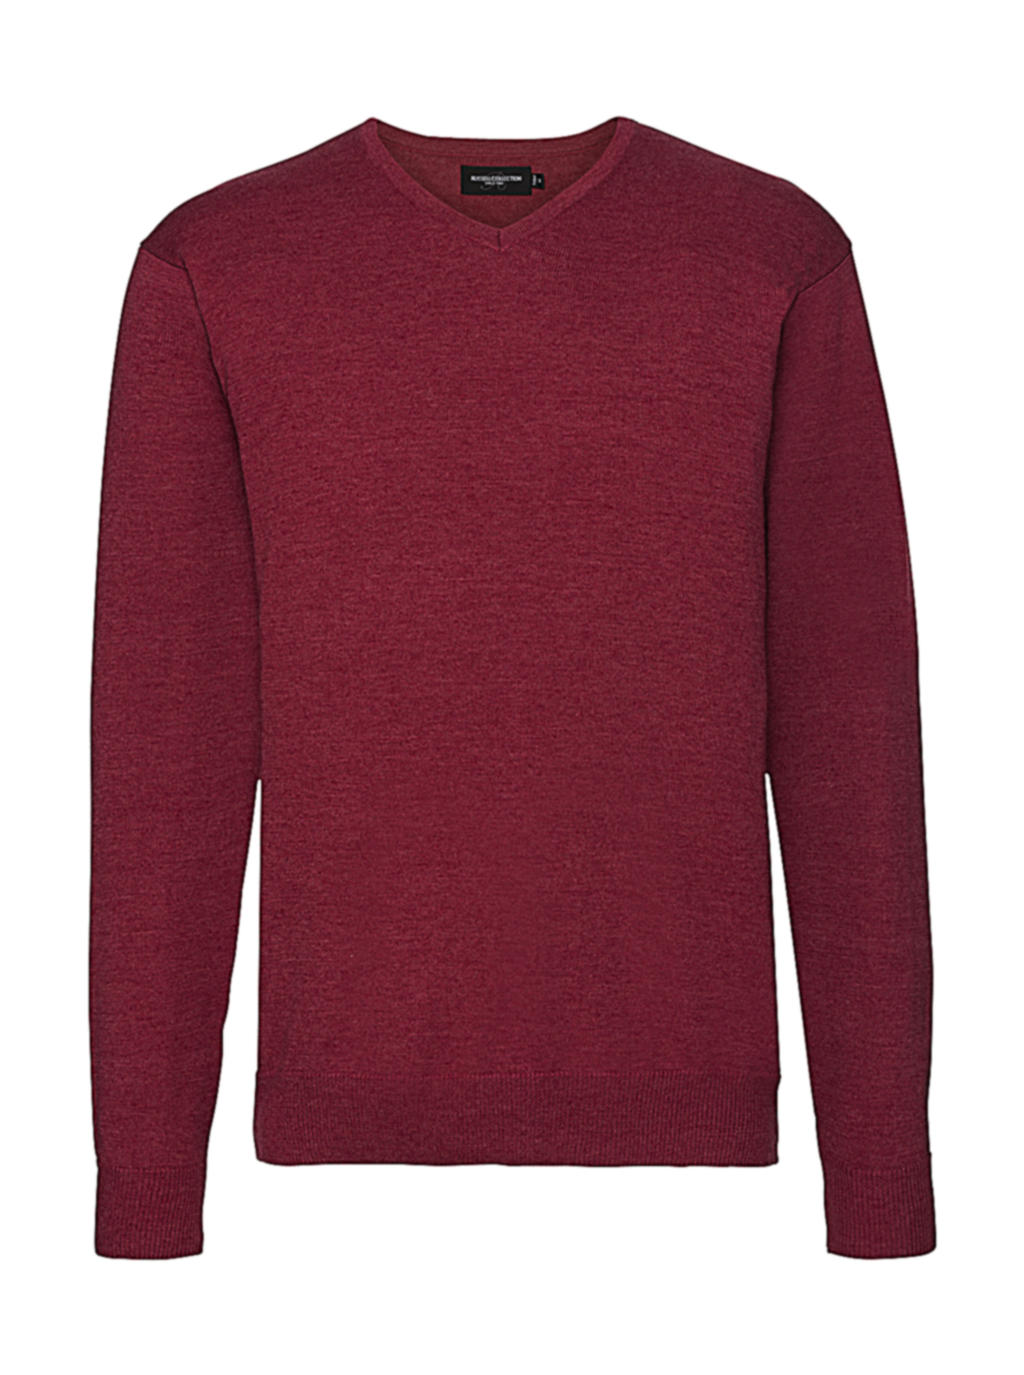  Mens V-Neck Knitted Pullover in Farbe Cranberry Marl